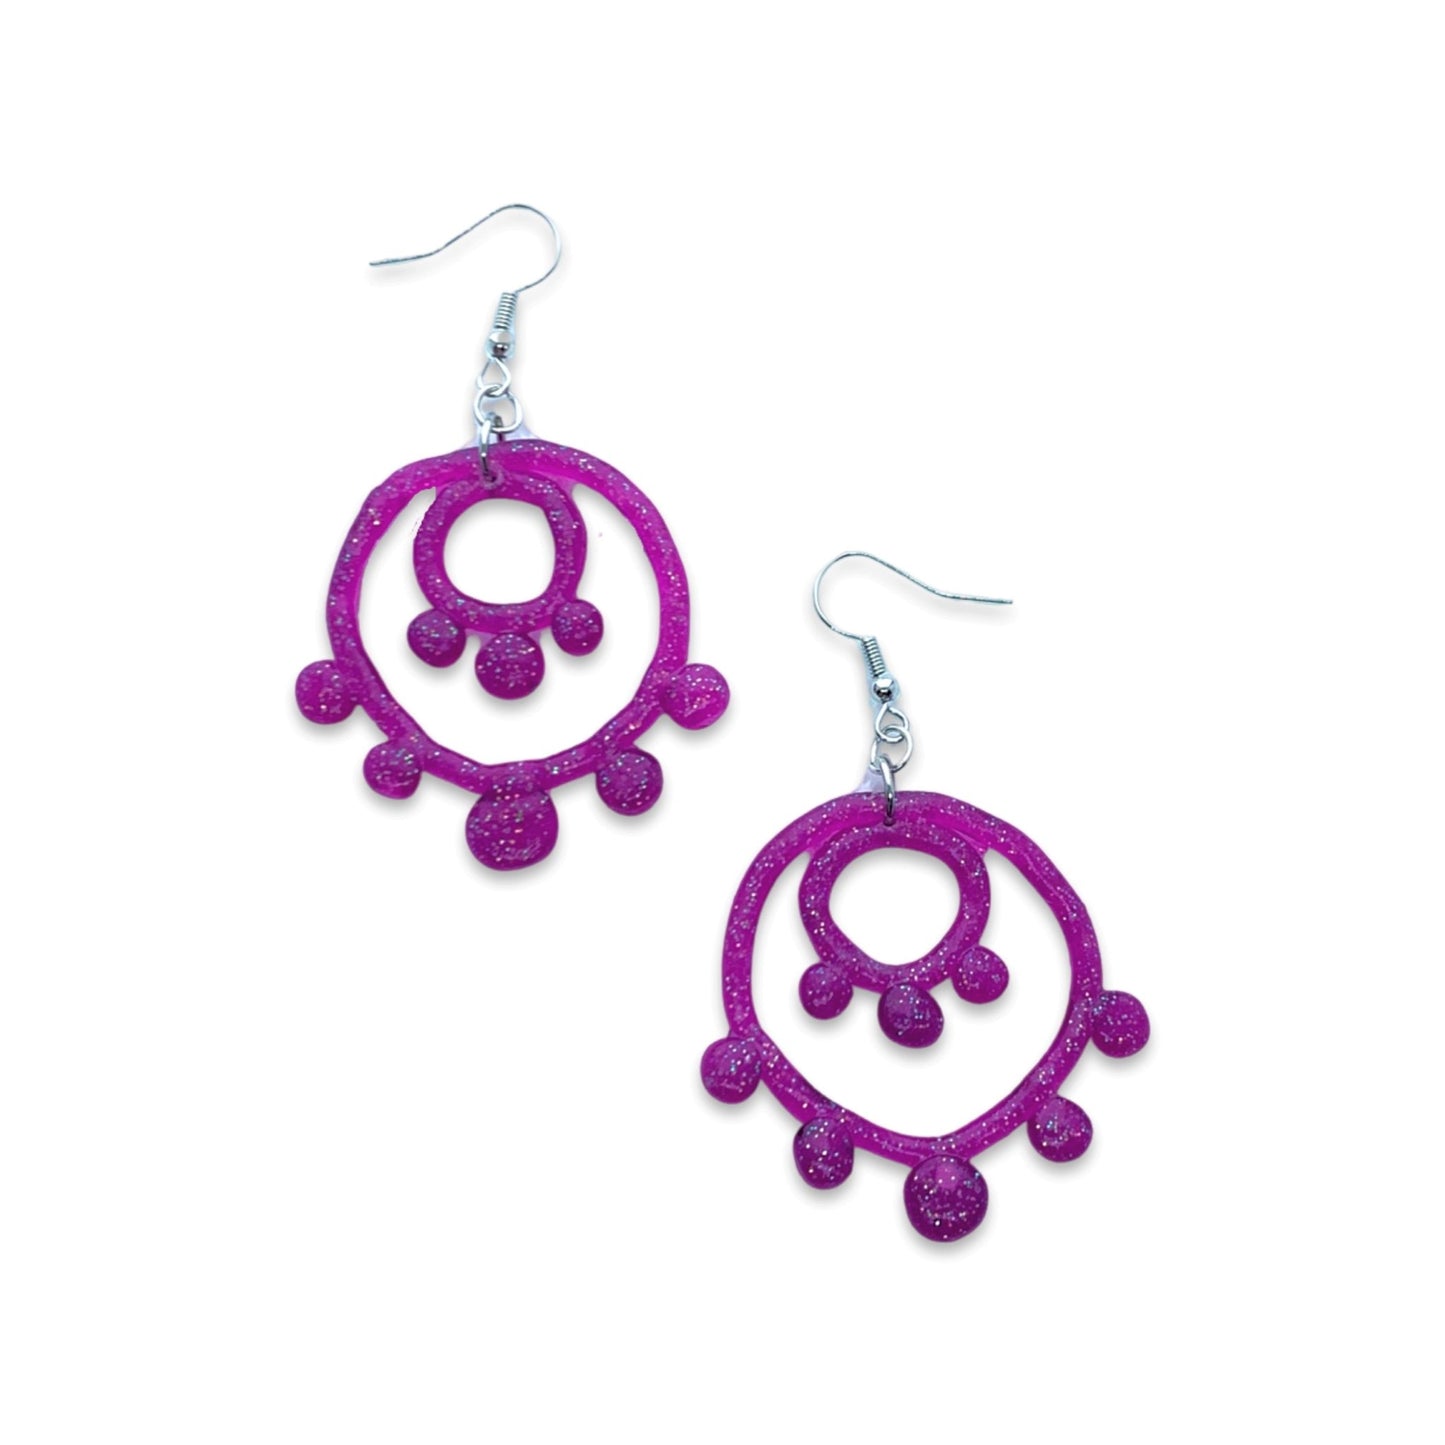 Purple Dotted Double Circle Earrings, translucent, glitter - LumiFae